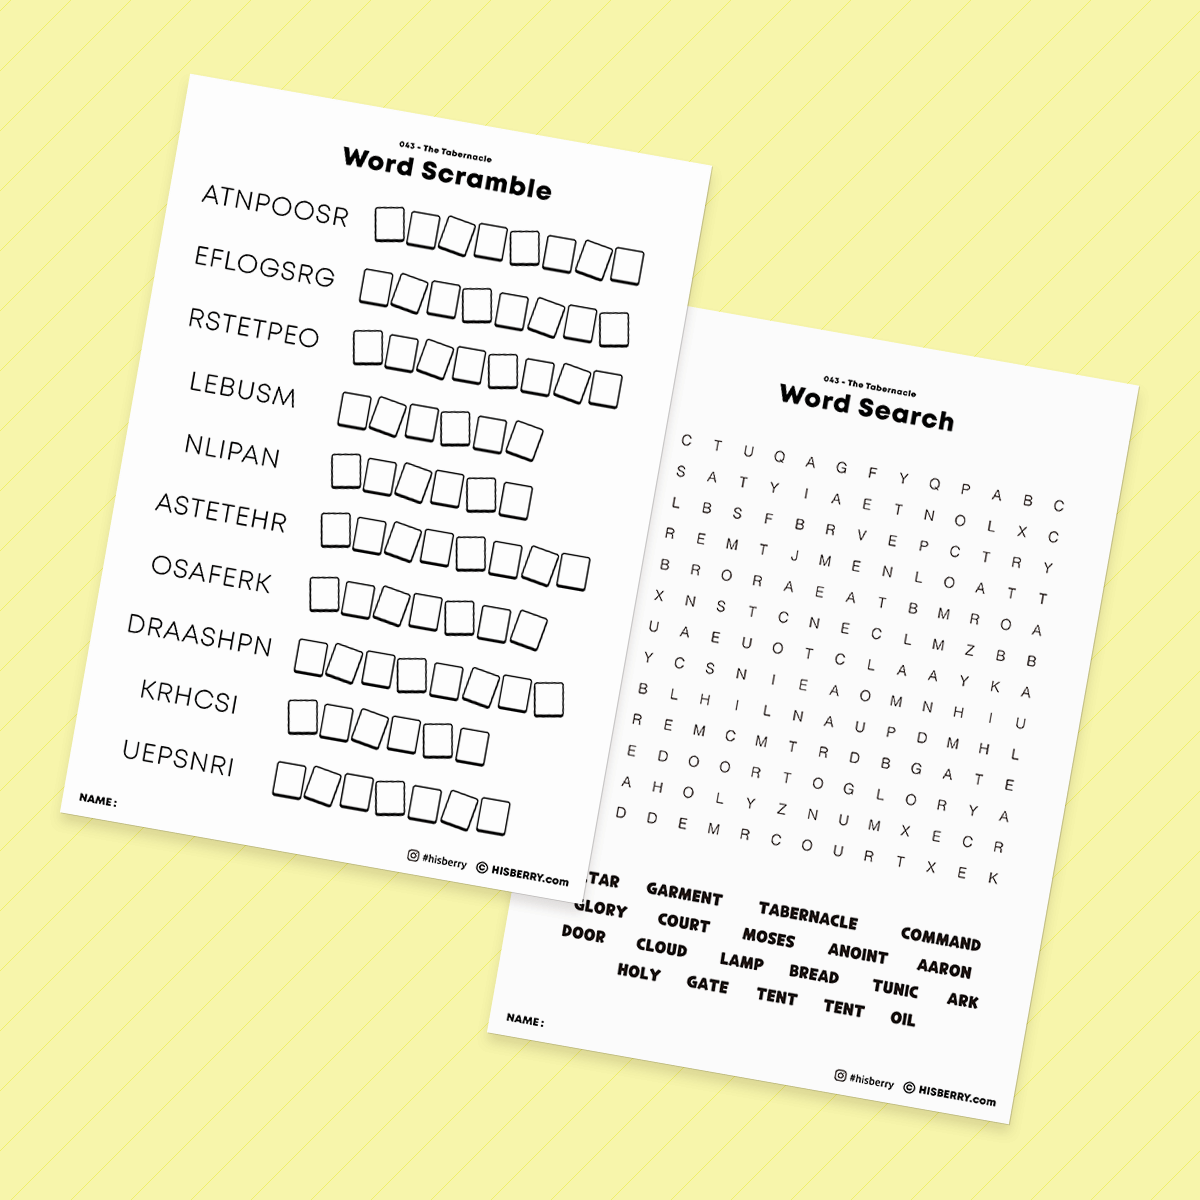 The Tabernacle - Bible Verse Activity Worksheets